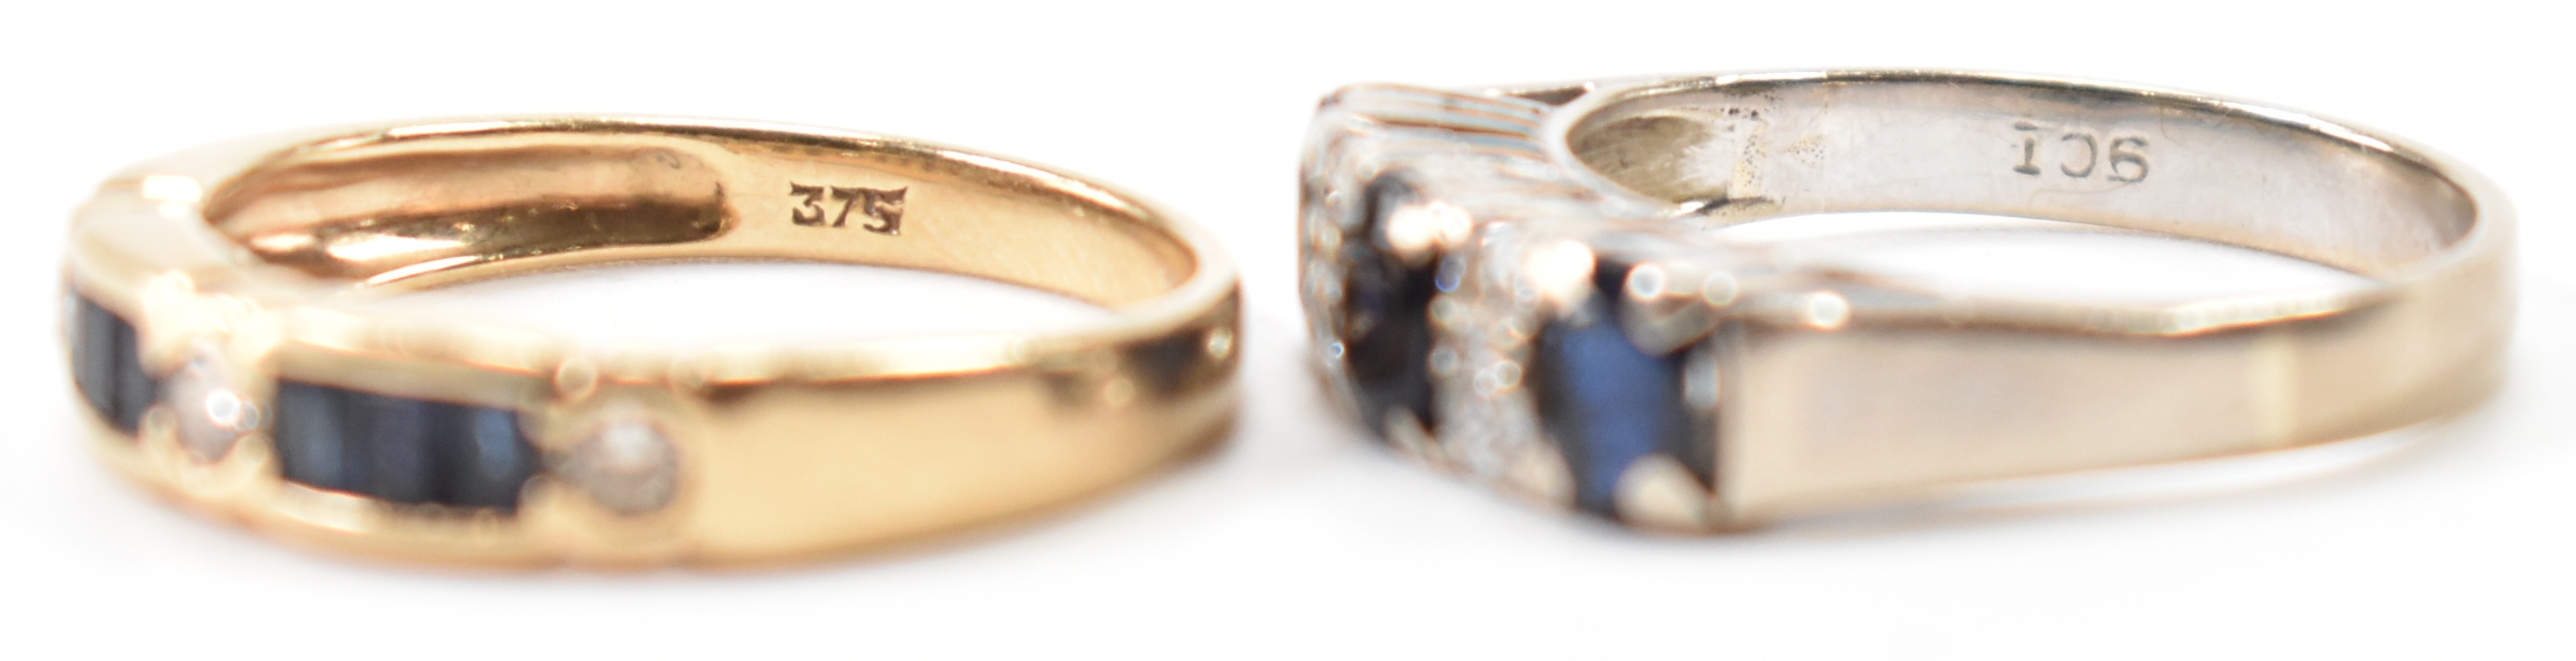 TWO 9CT GOLD SAPPHIRE & DIAMOND RINGS - Image 4 of 6